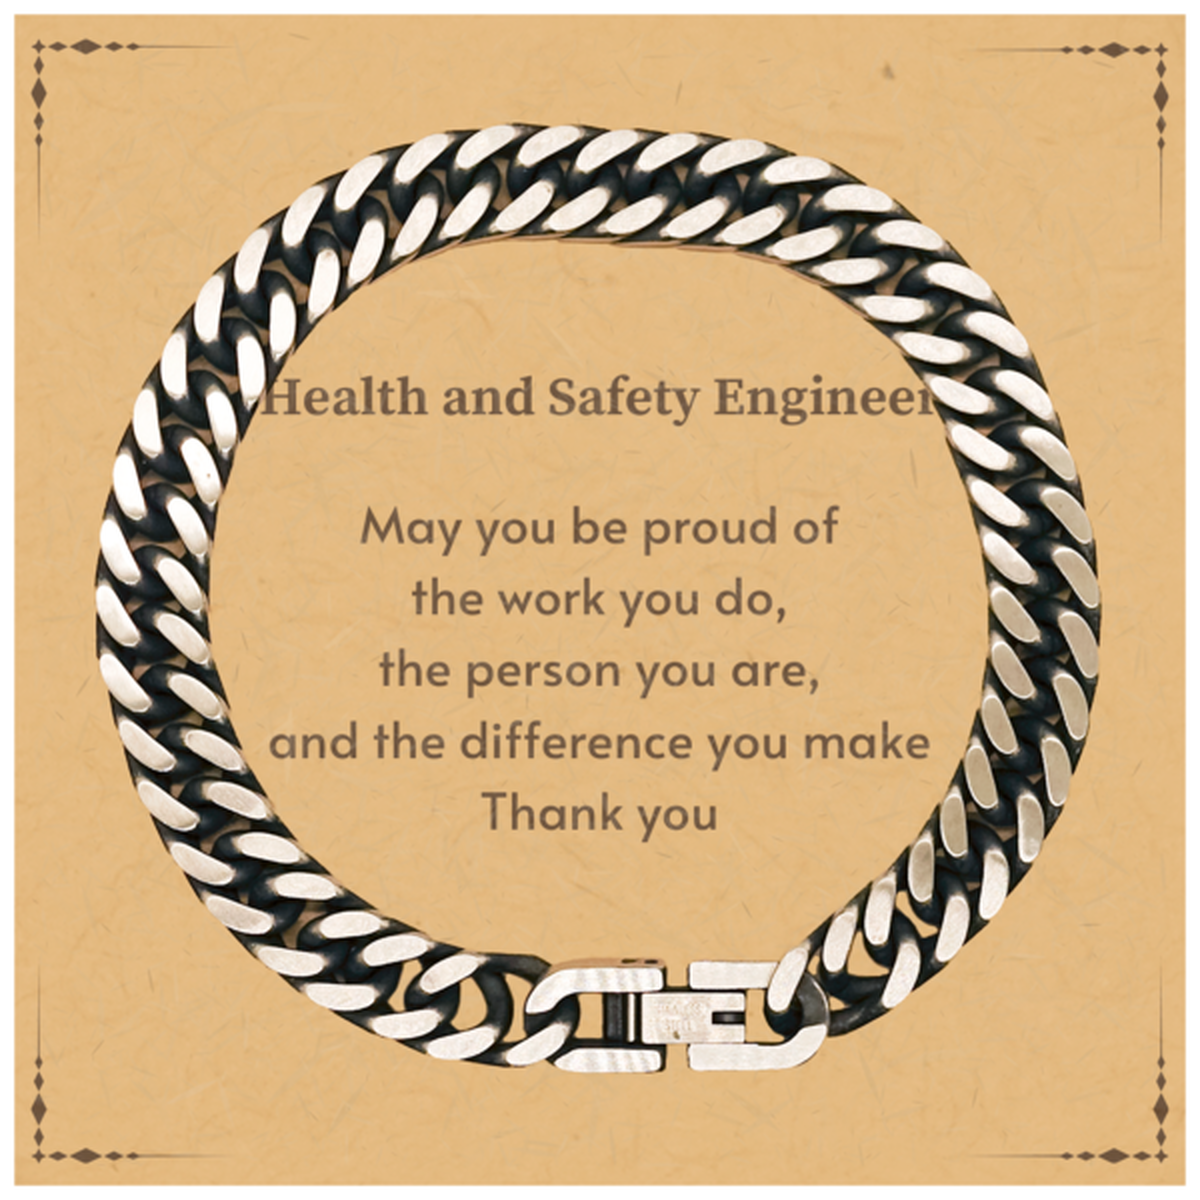 Heartwarming Cuban Link Chain Bracelet Retirement Coworkers Gifts for Health and Safety Engineer, Health and Safety Engineer May You be proud of the work you do, the person you are Gifts for Boss Men Women Friends